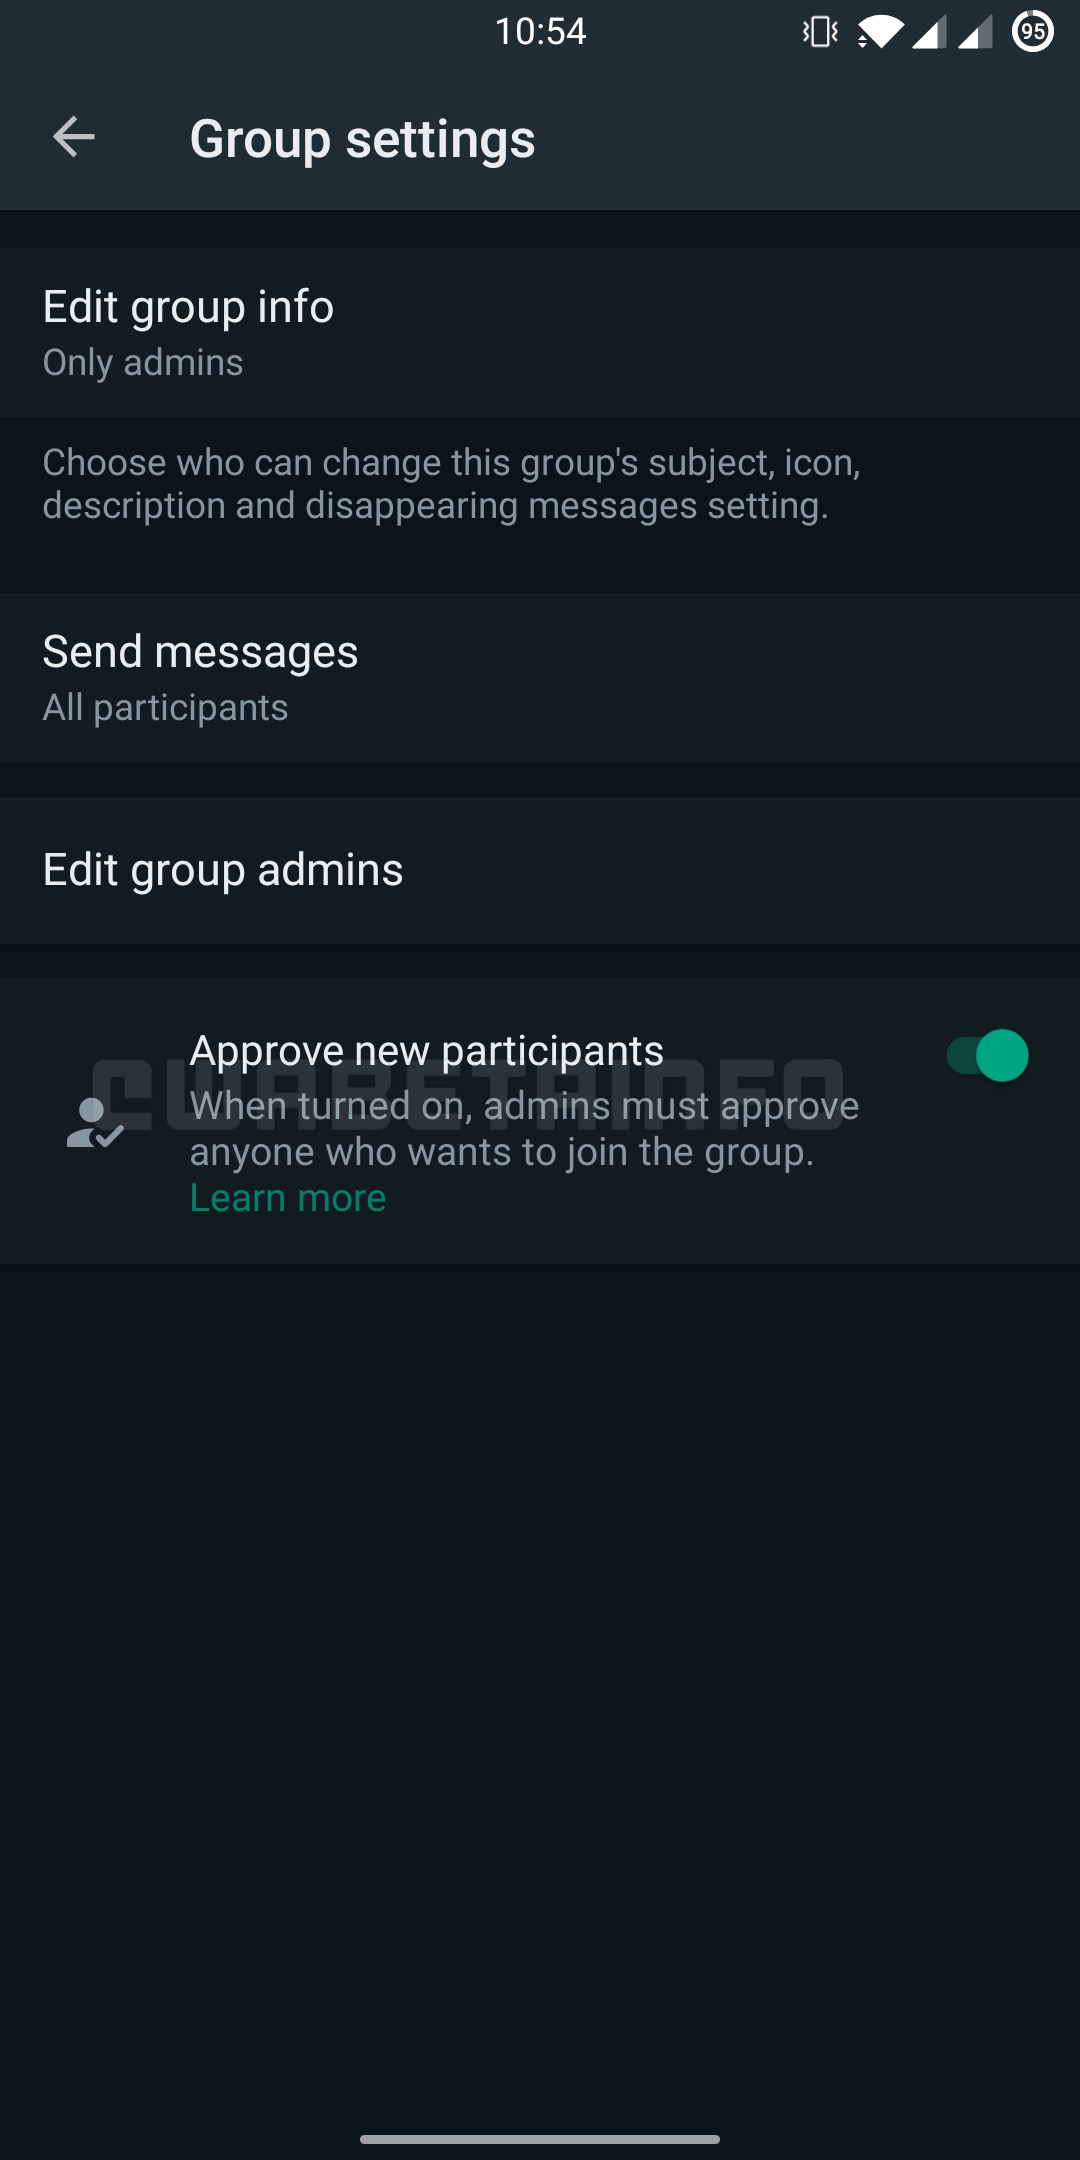 WA APPROVE NEW PARTICIPANTS 65BG ANDROID